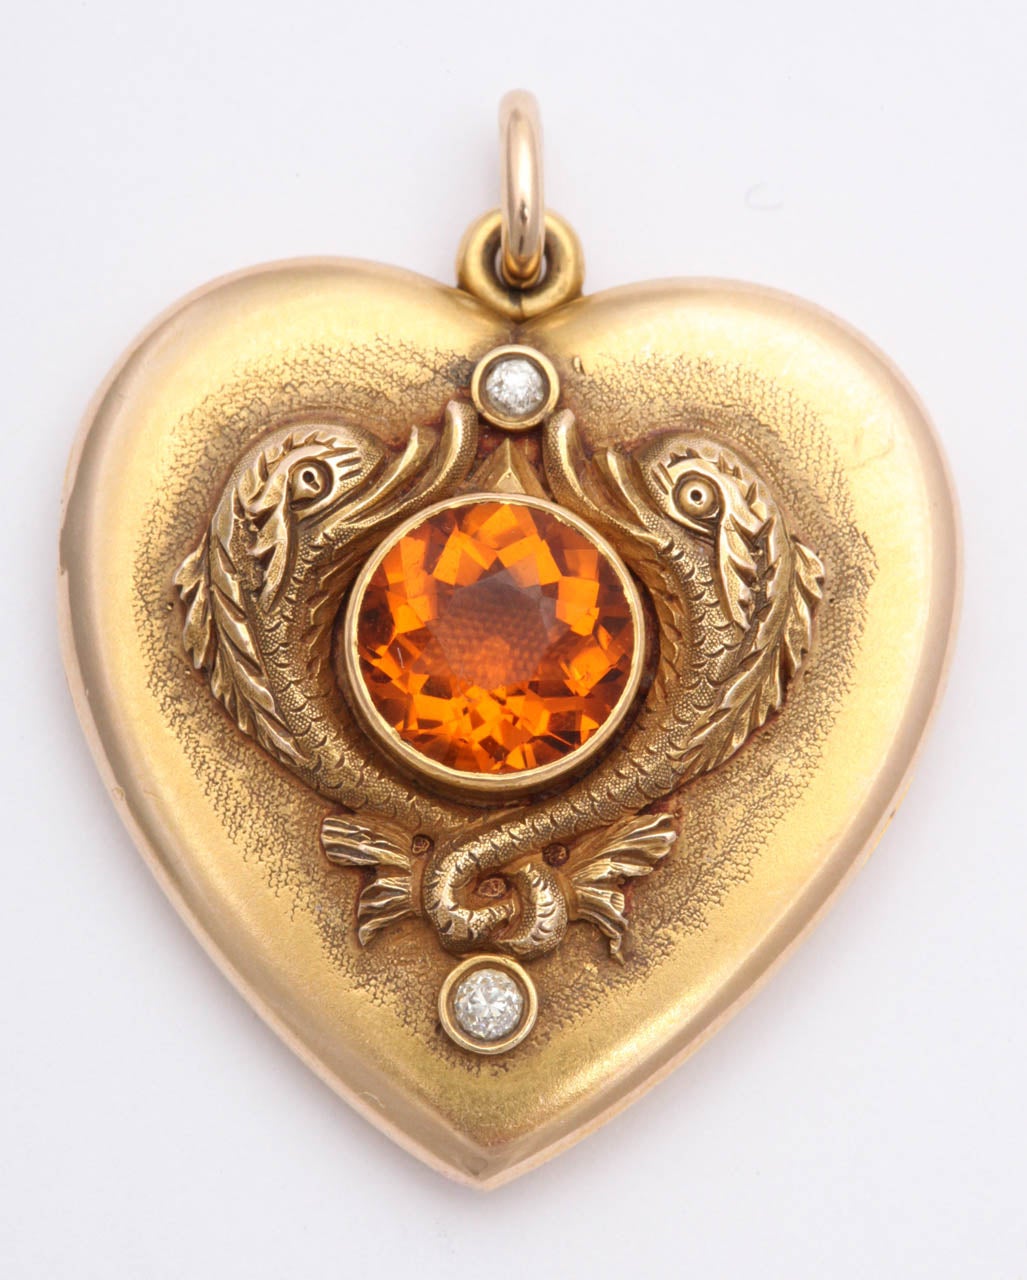 14kt yellow gold ART NOUVEAU Open heart locket centering a brilliant cut beautiful color citrine and surrounded by two old mine cut diamonds with handmade gold workmanship opens up to put two photos inside on each side